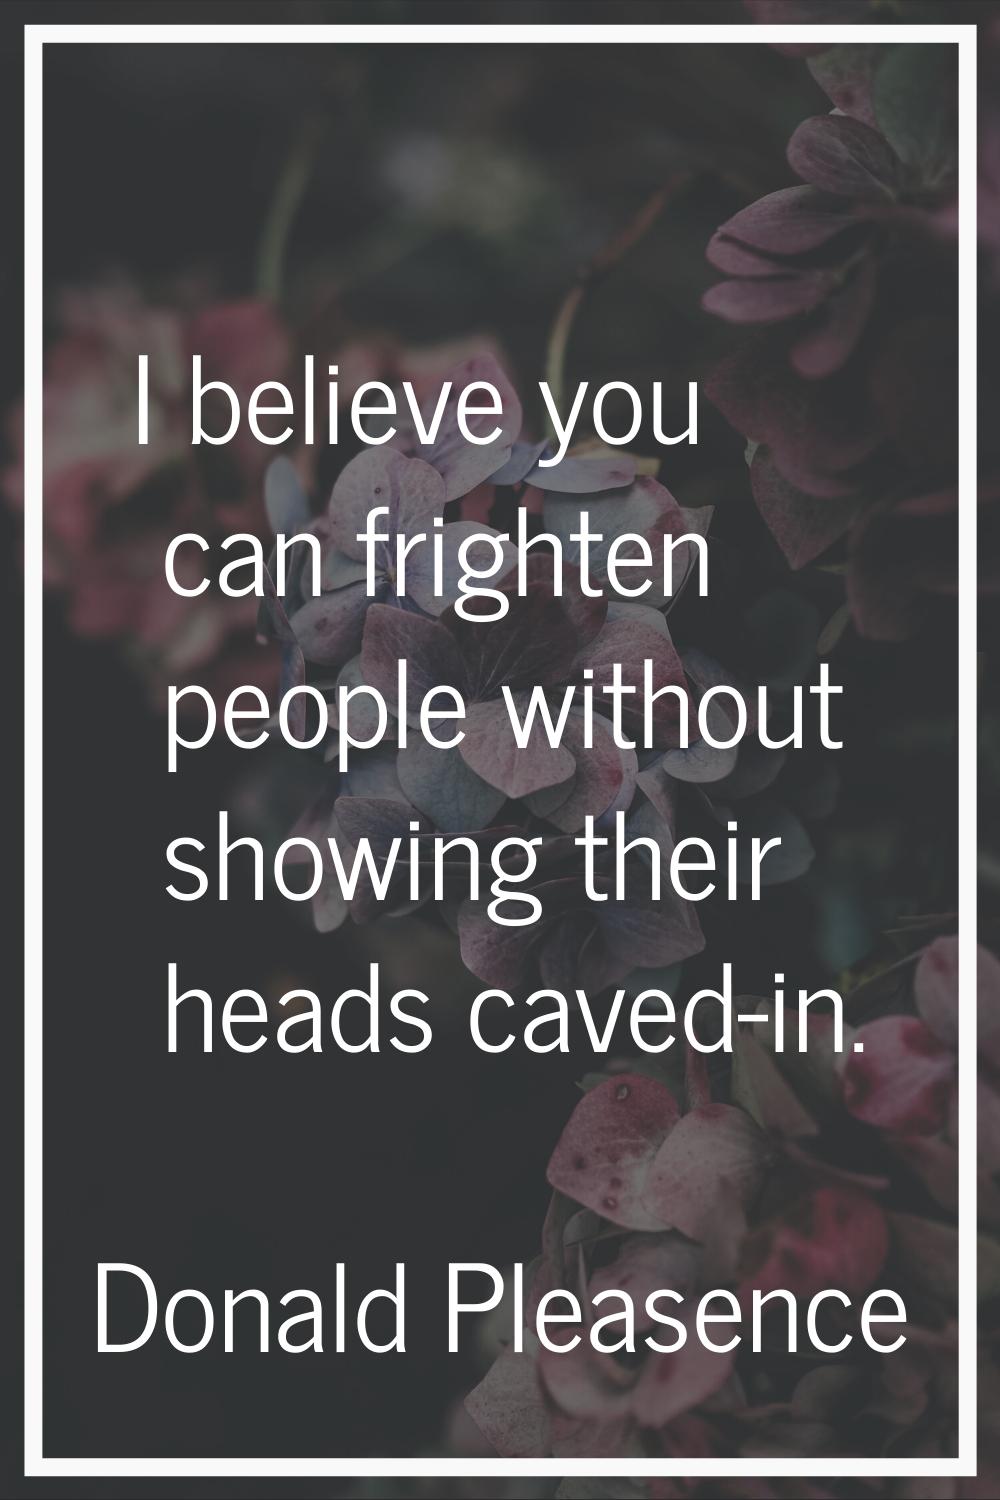 I believe you can frighten people without showing their heads caved-in.